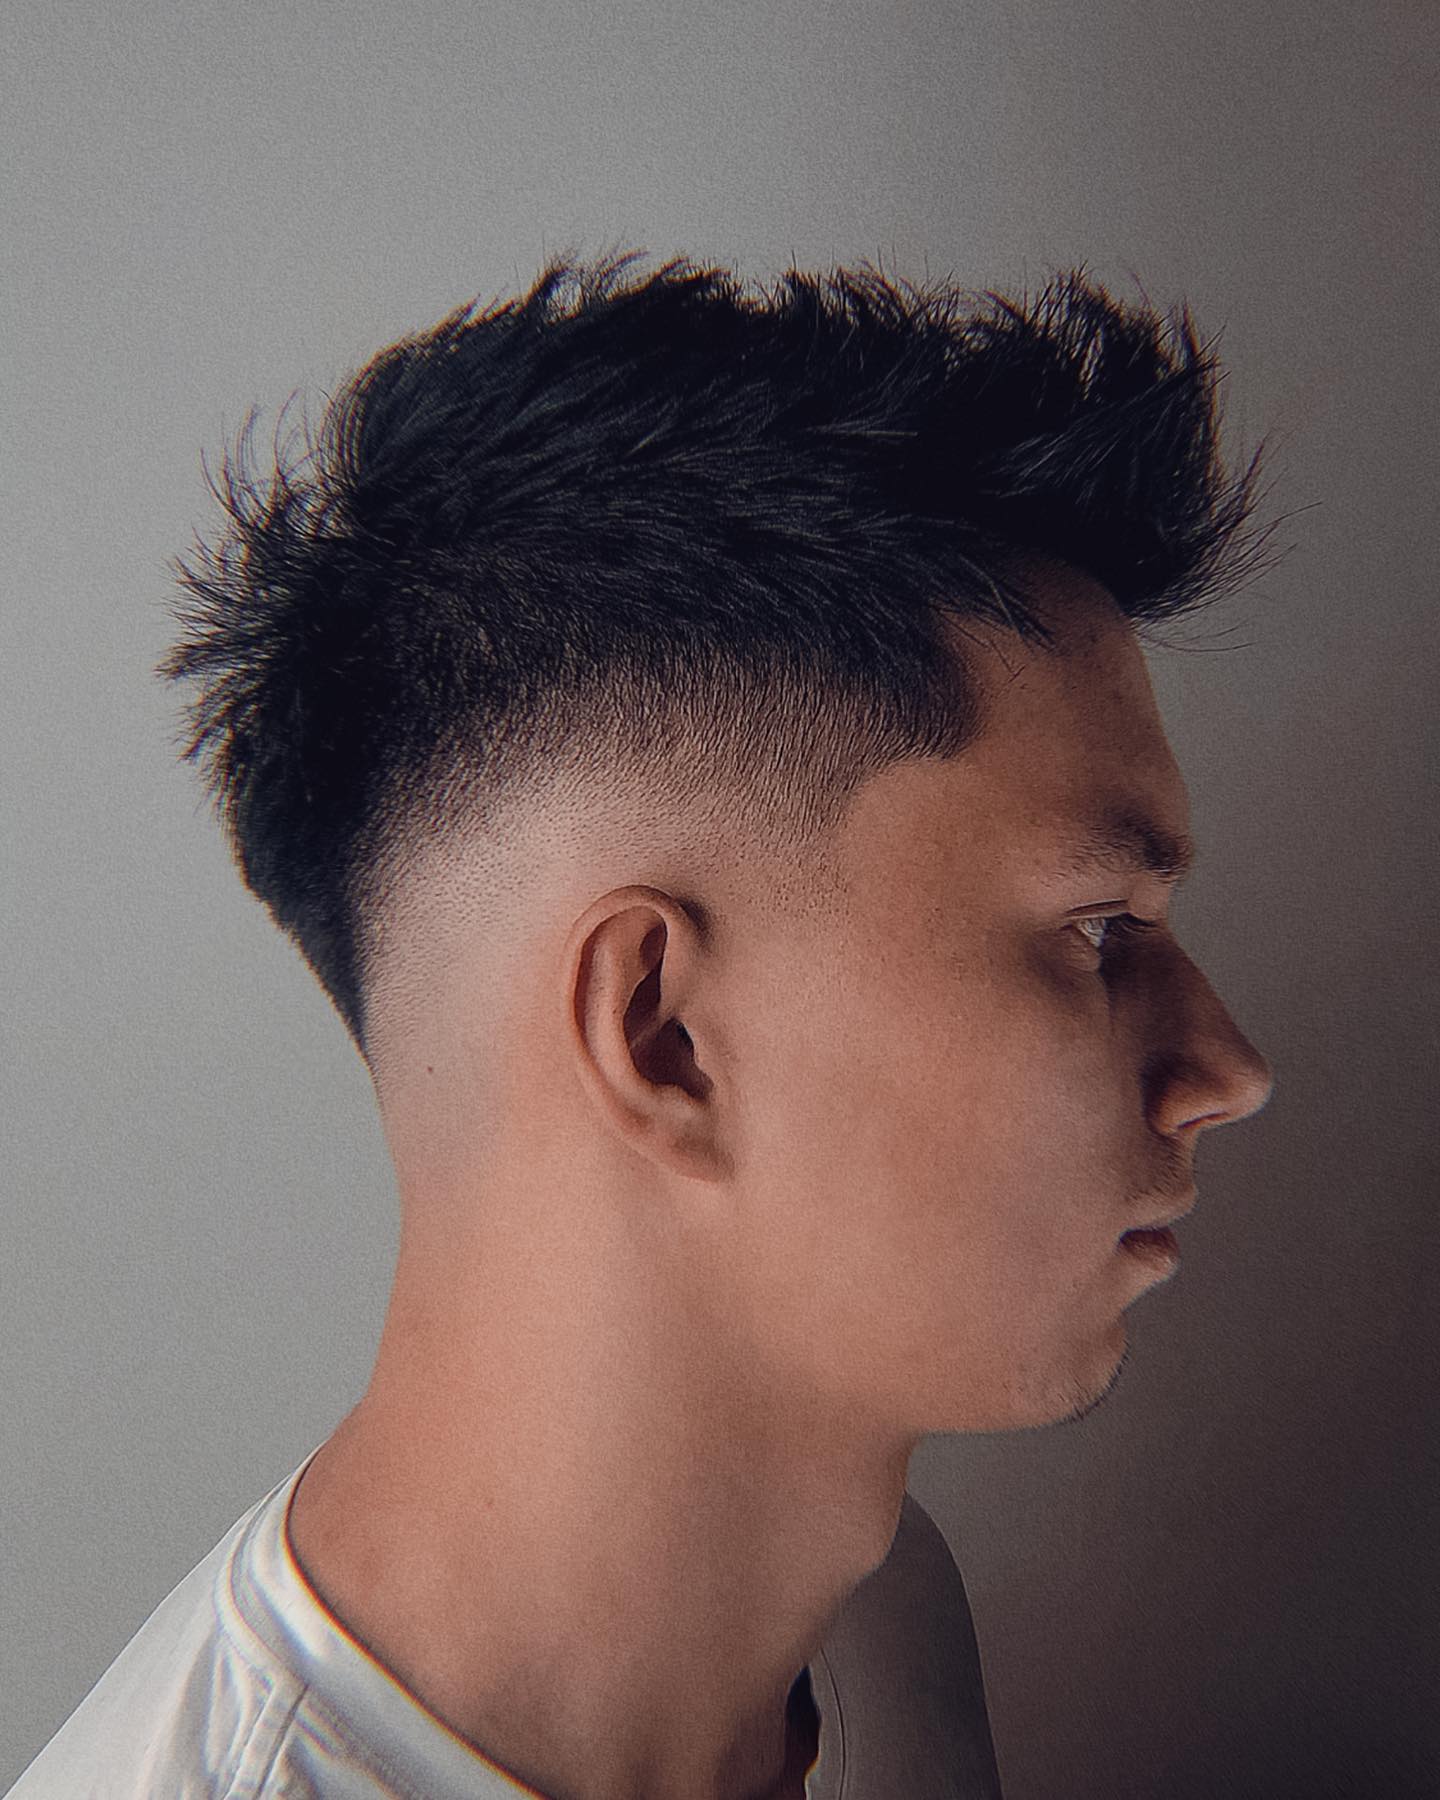 THE BEST MEN'S HAIRSTYLES FOR SUMMER